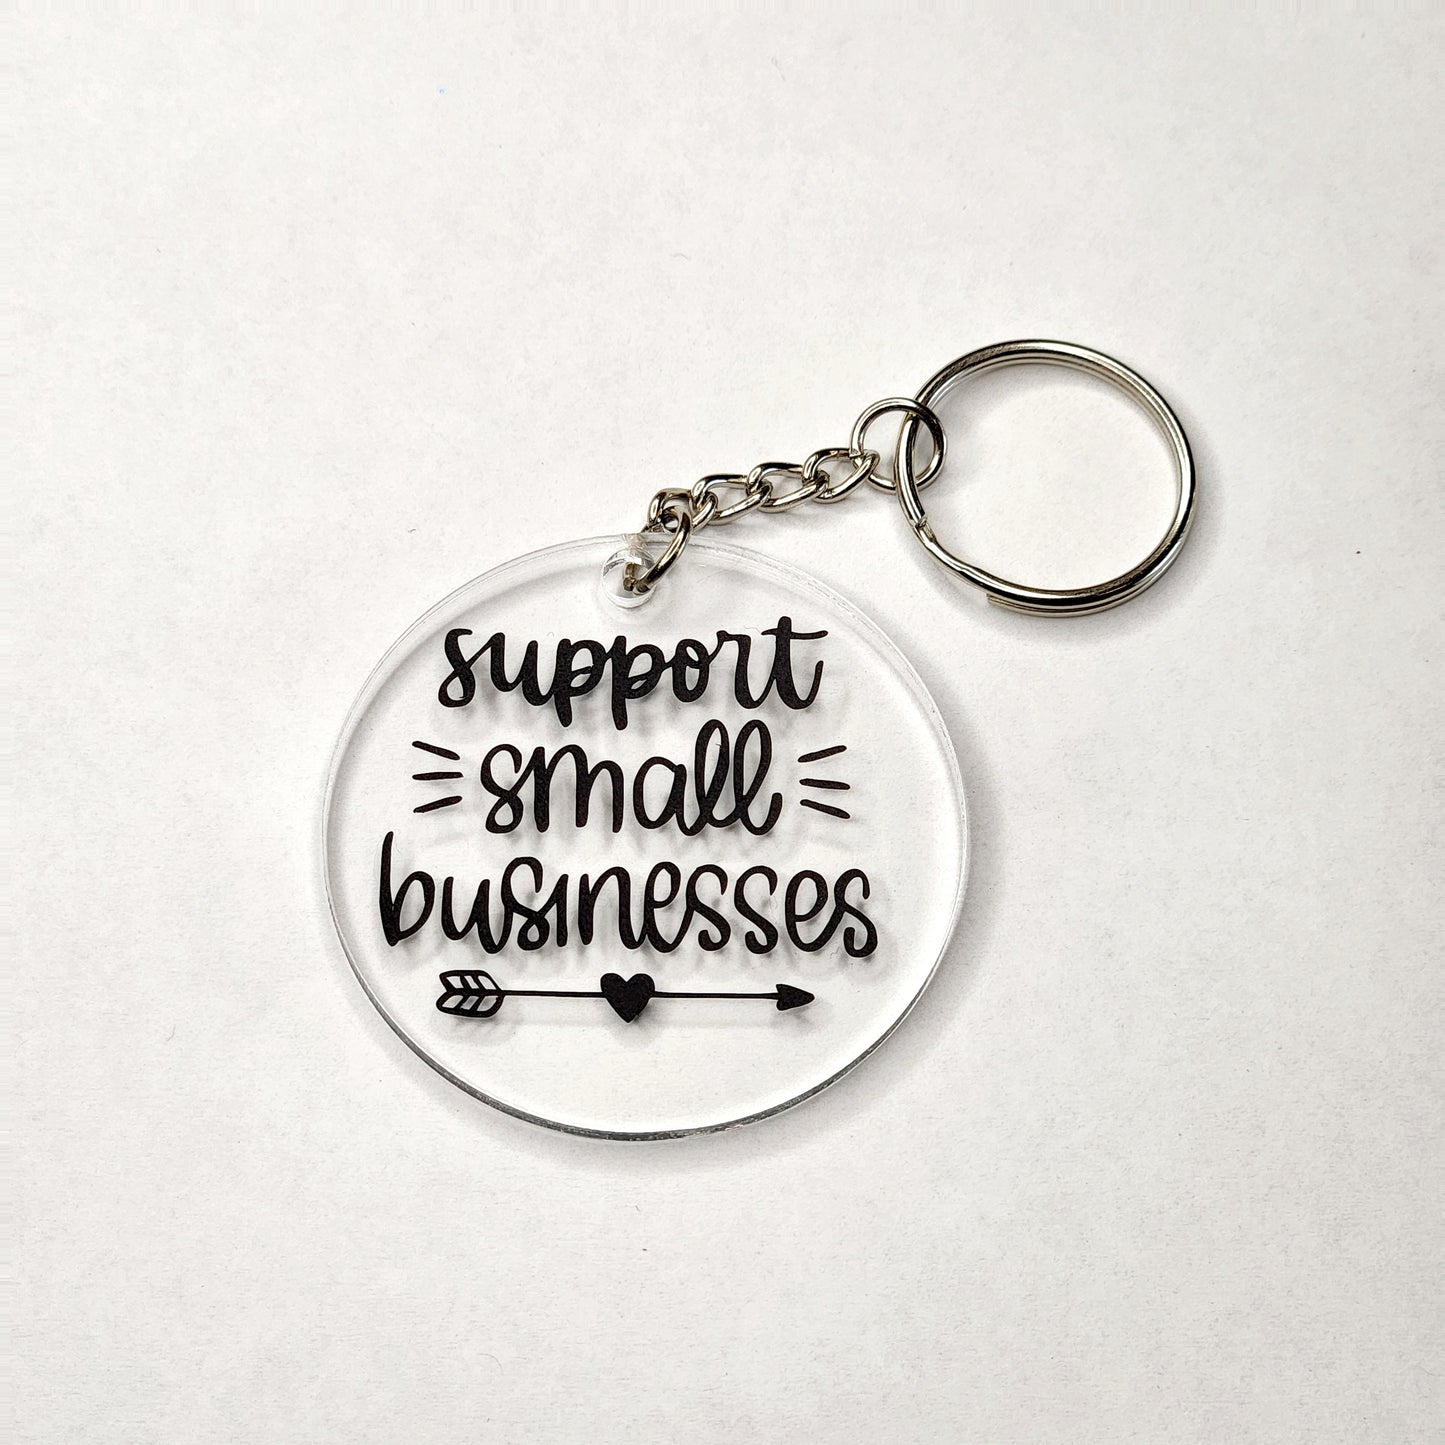 Small Business Keychain - Variety